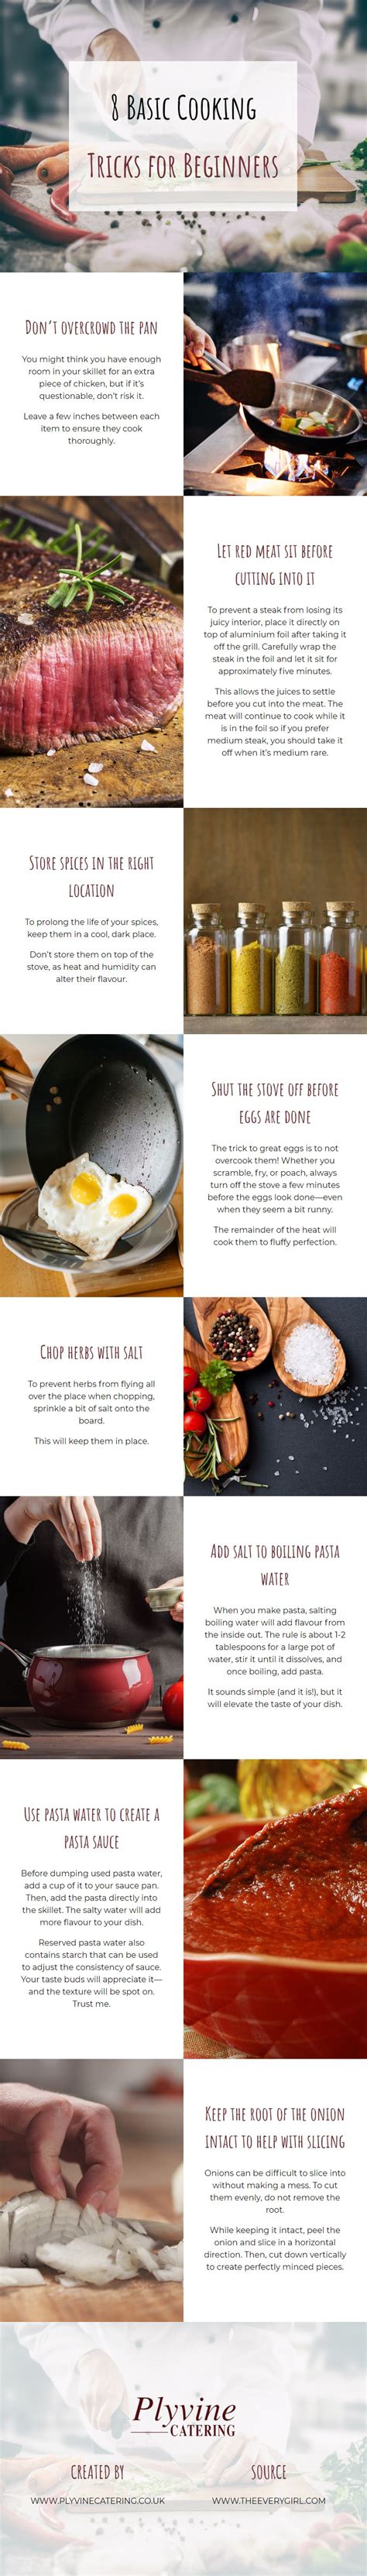 In This Infographic We Share 8 Basic Cooking Tricks For Beginners Basic